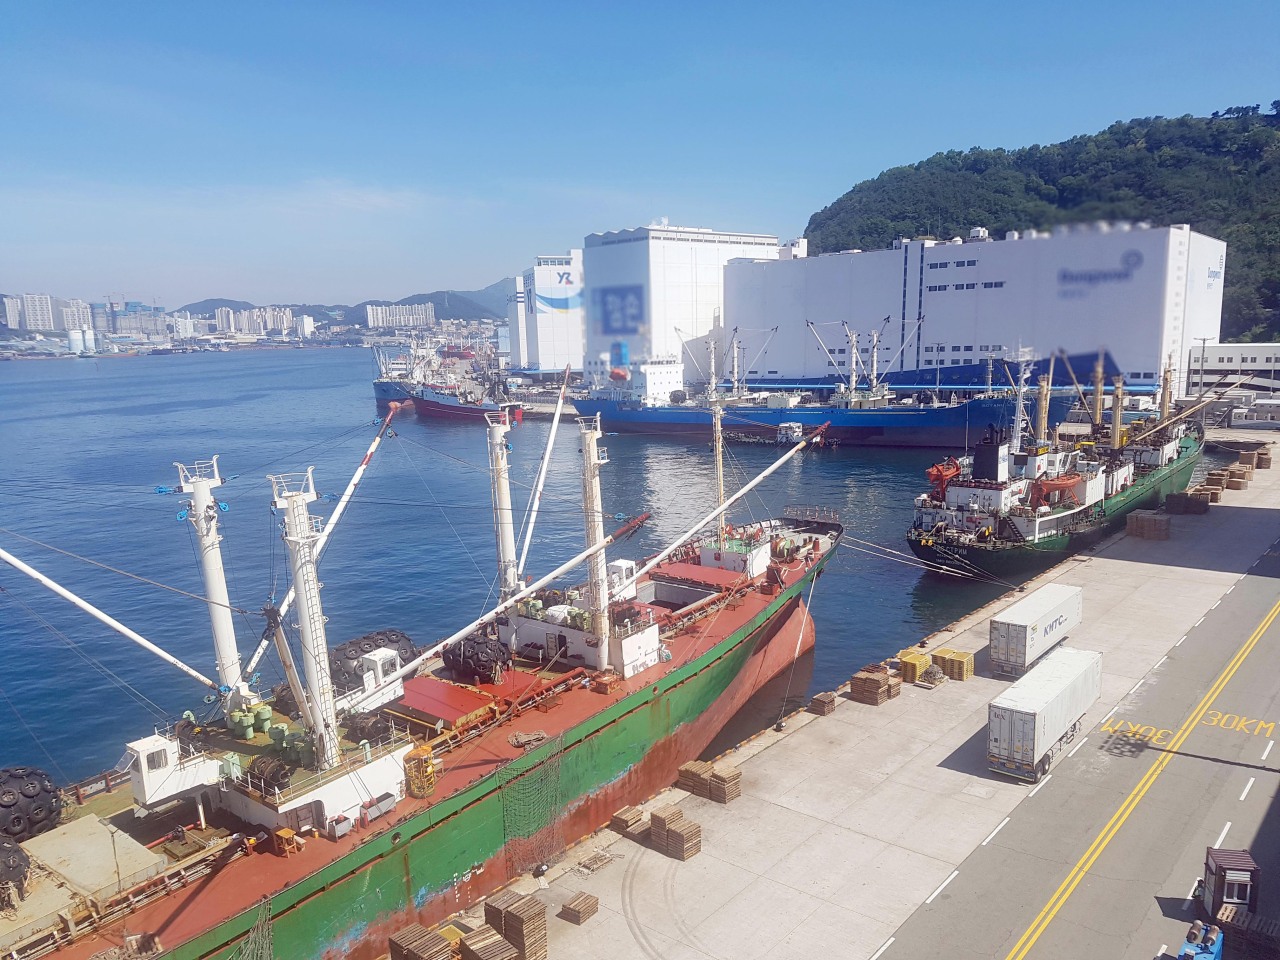 Crew members of a Russian cargo ship that docked at a Busan port Friday have tested positive for the coronavirus. (Yonhap)